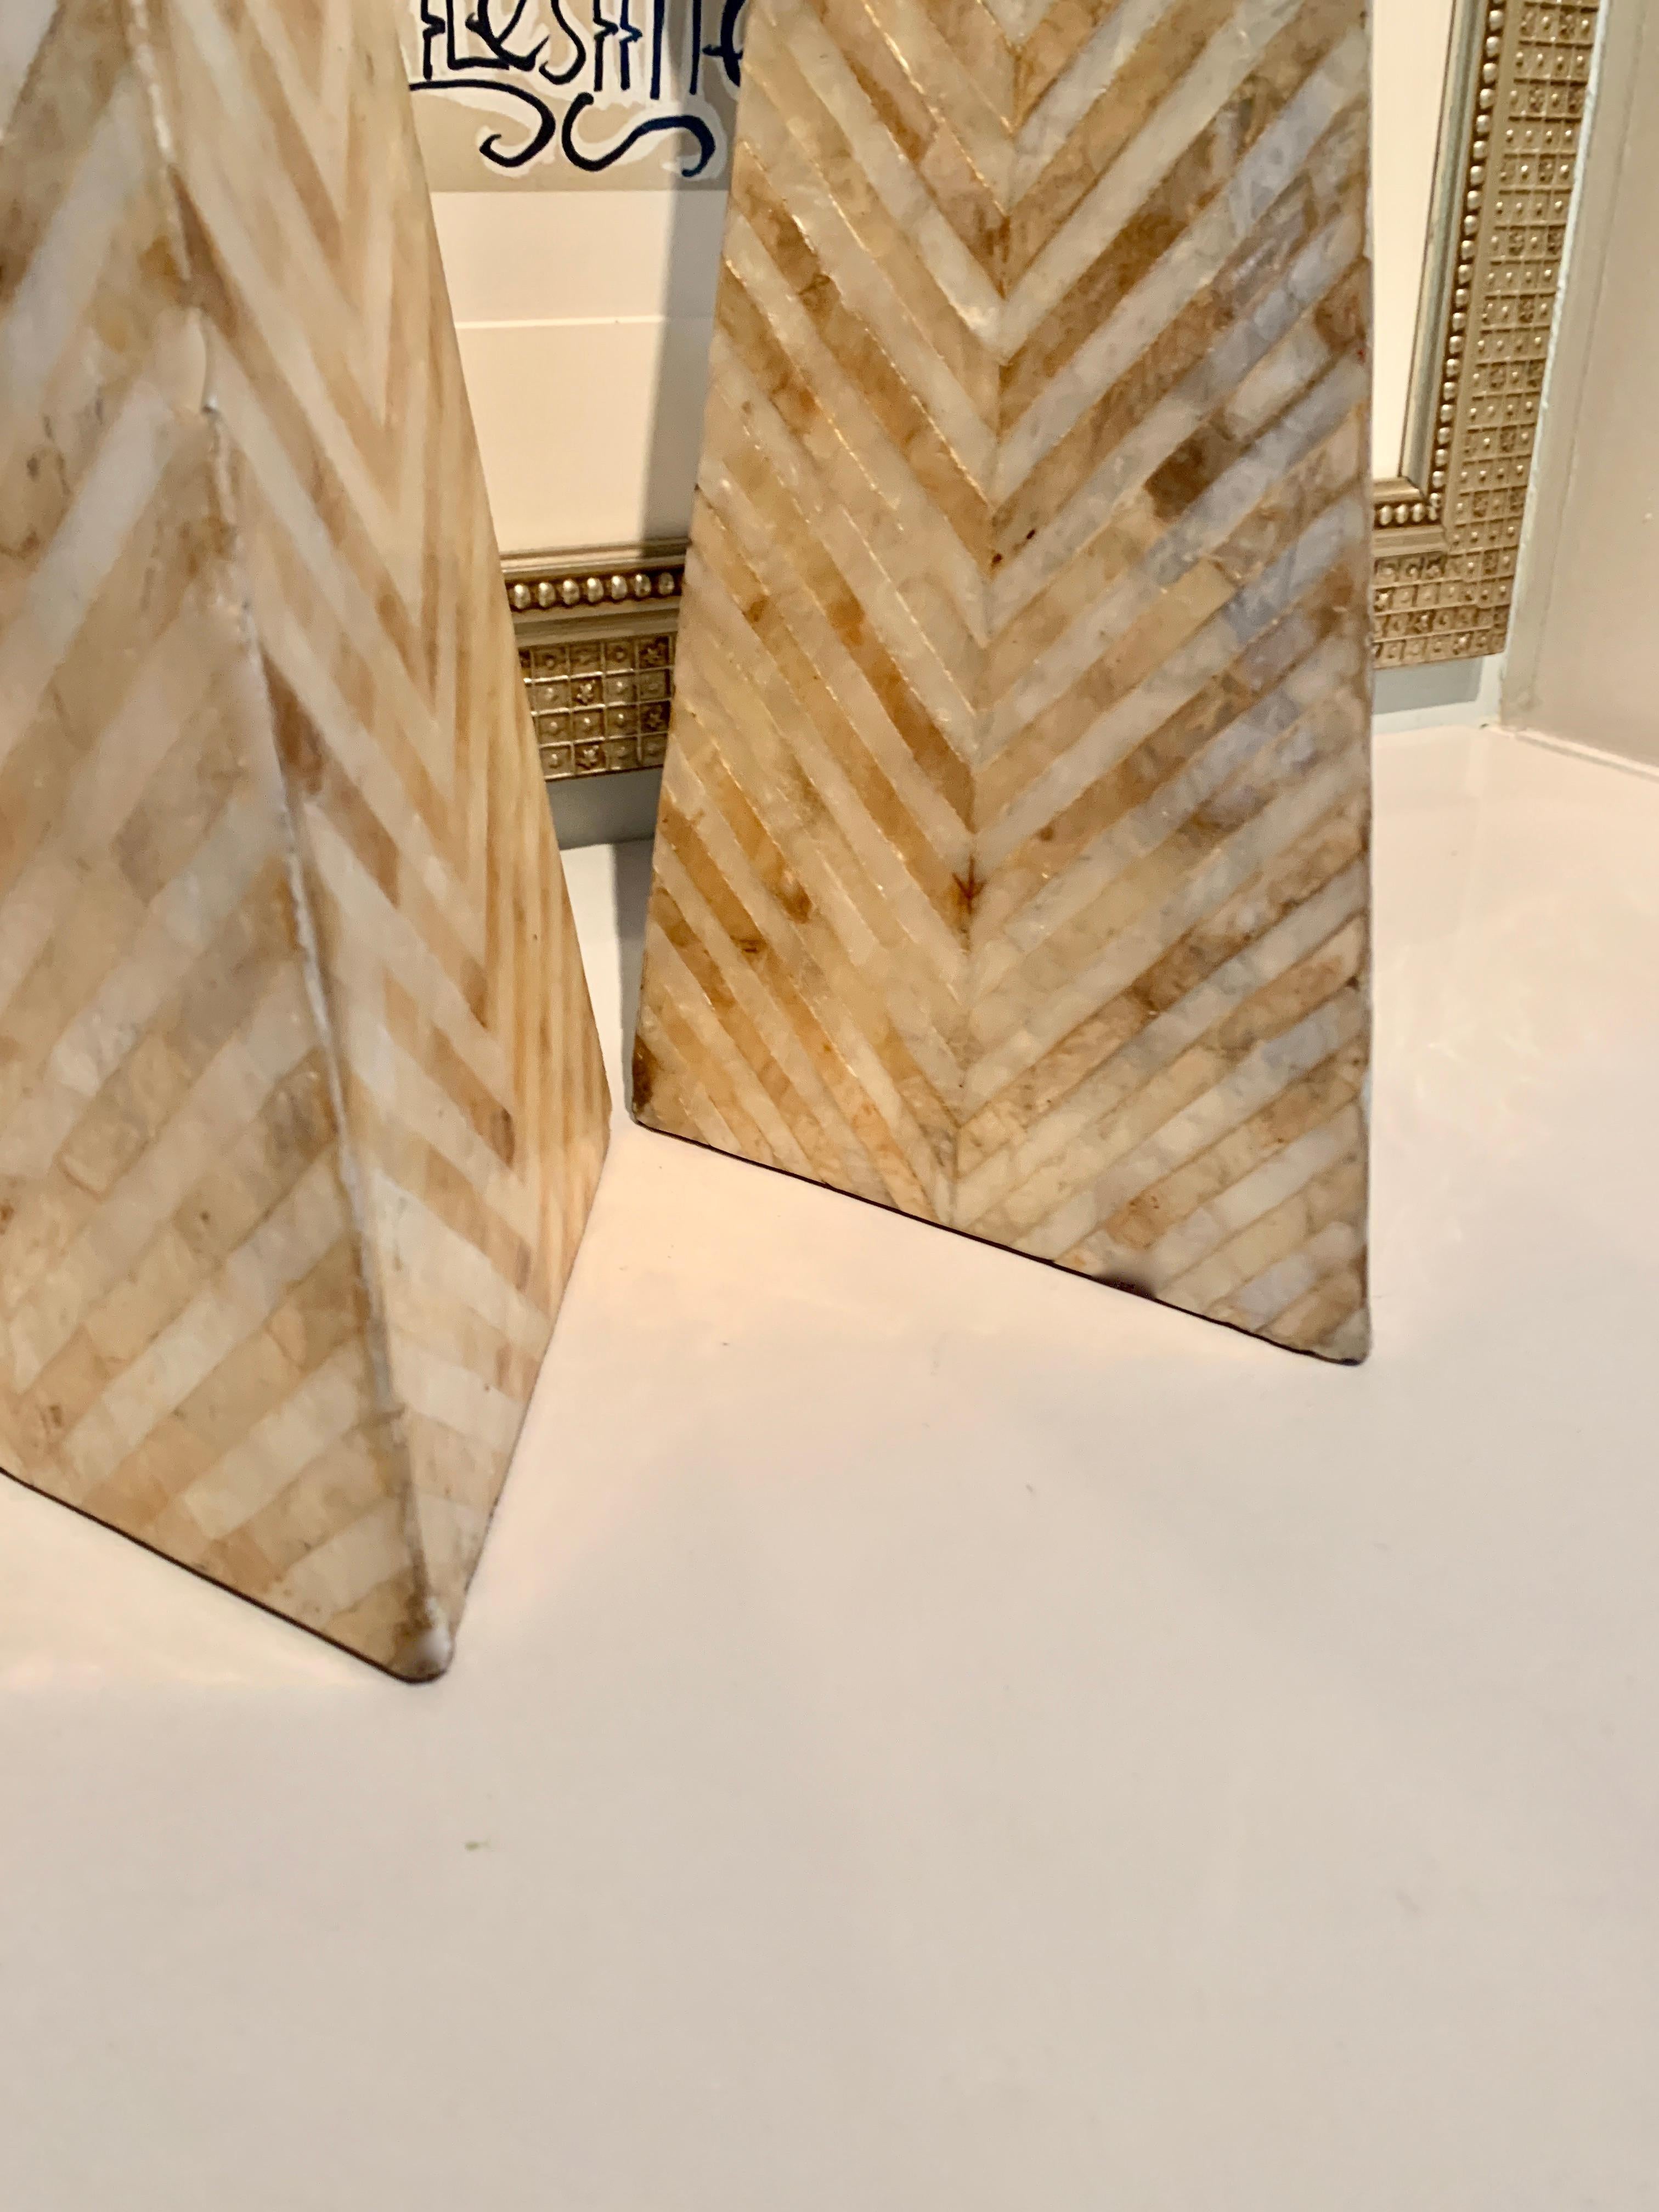 Pair of Maitland Smith Tessellated mother of pearl obelisks with brass tip - a lovely pair of obelisks well suited for the mantle or shelf.